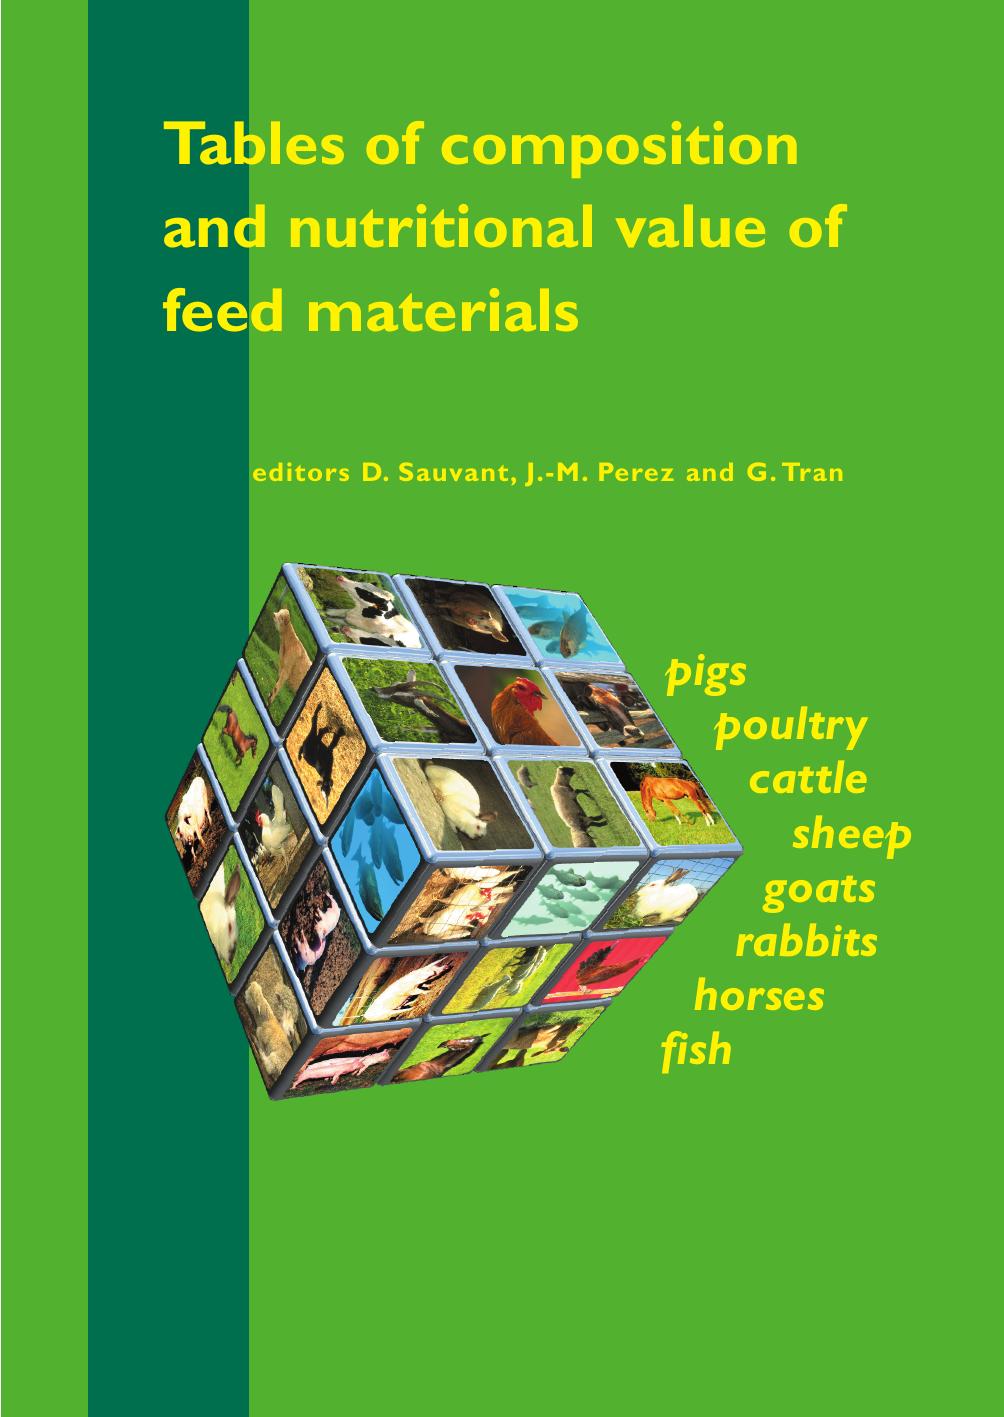 Tables of composition and nutritional value of feed materials